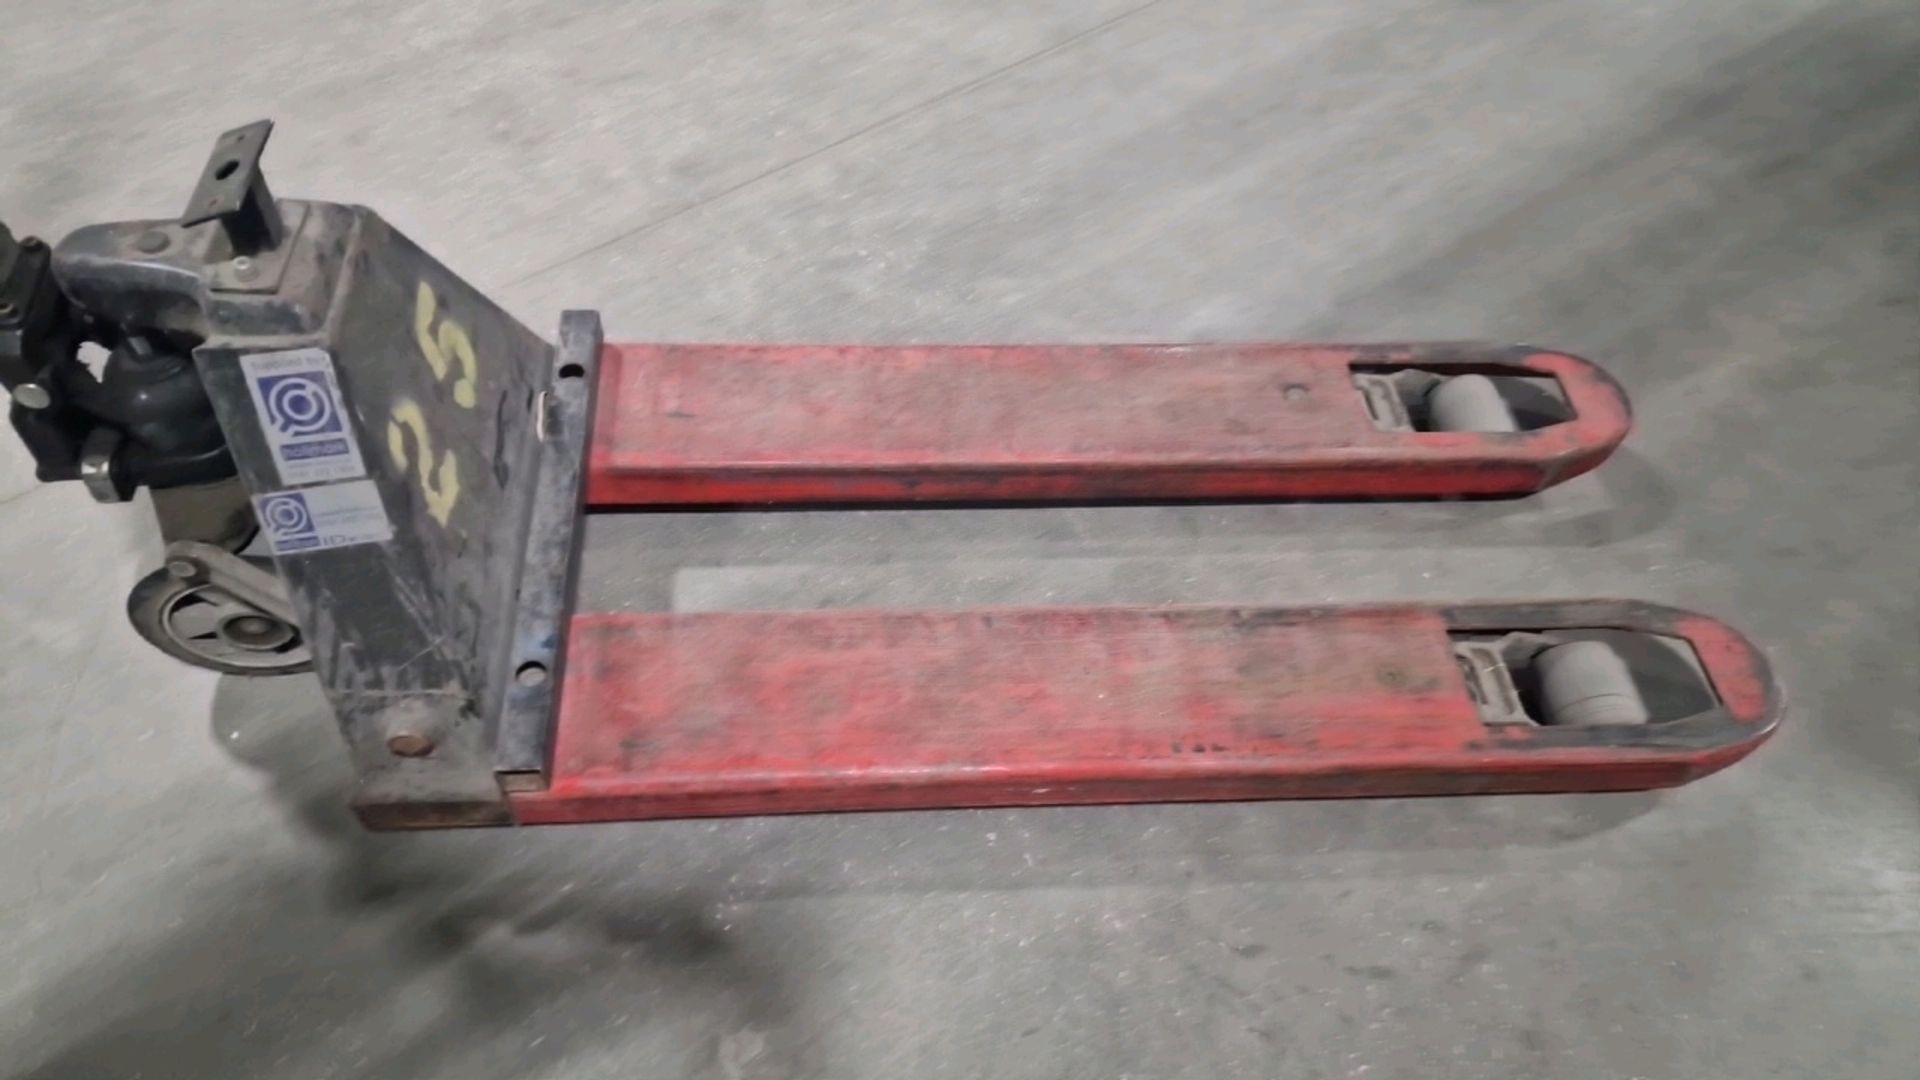 Lift Mate Hand Pallet Truck - Image 2 of 5